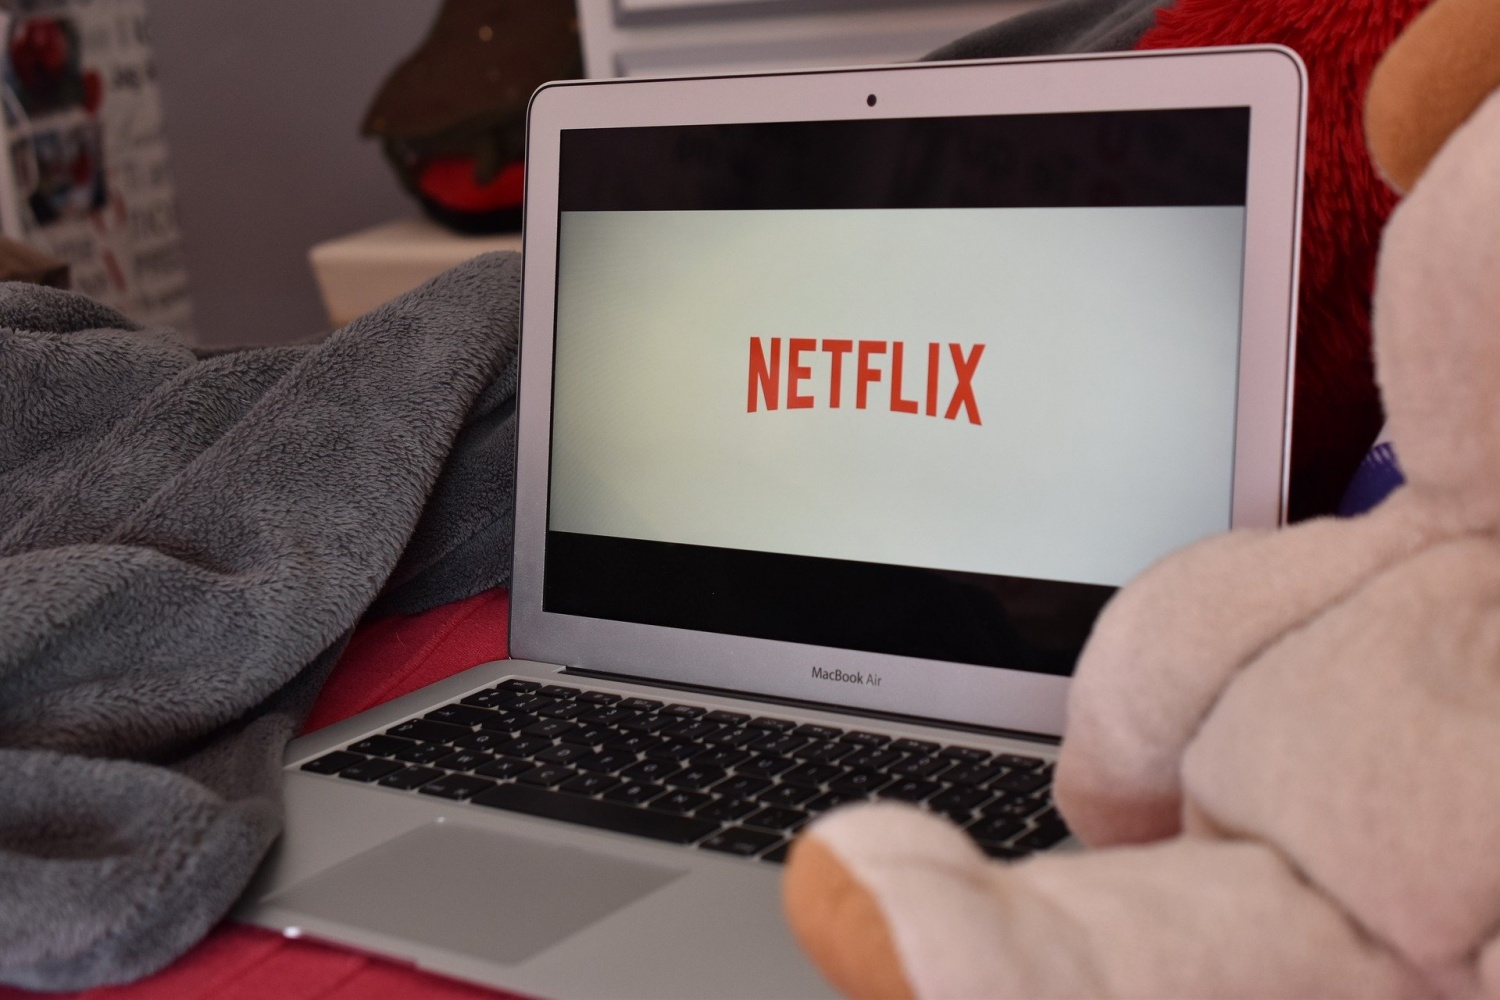 Get Ready for Netflix in 2020